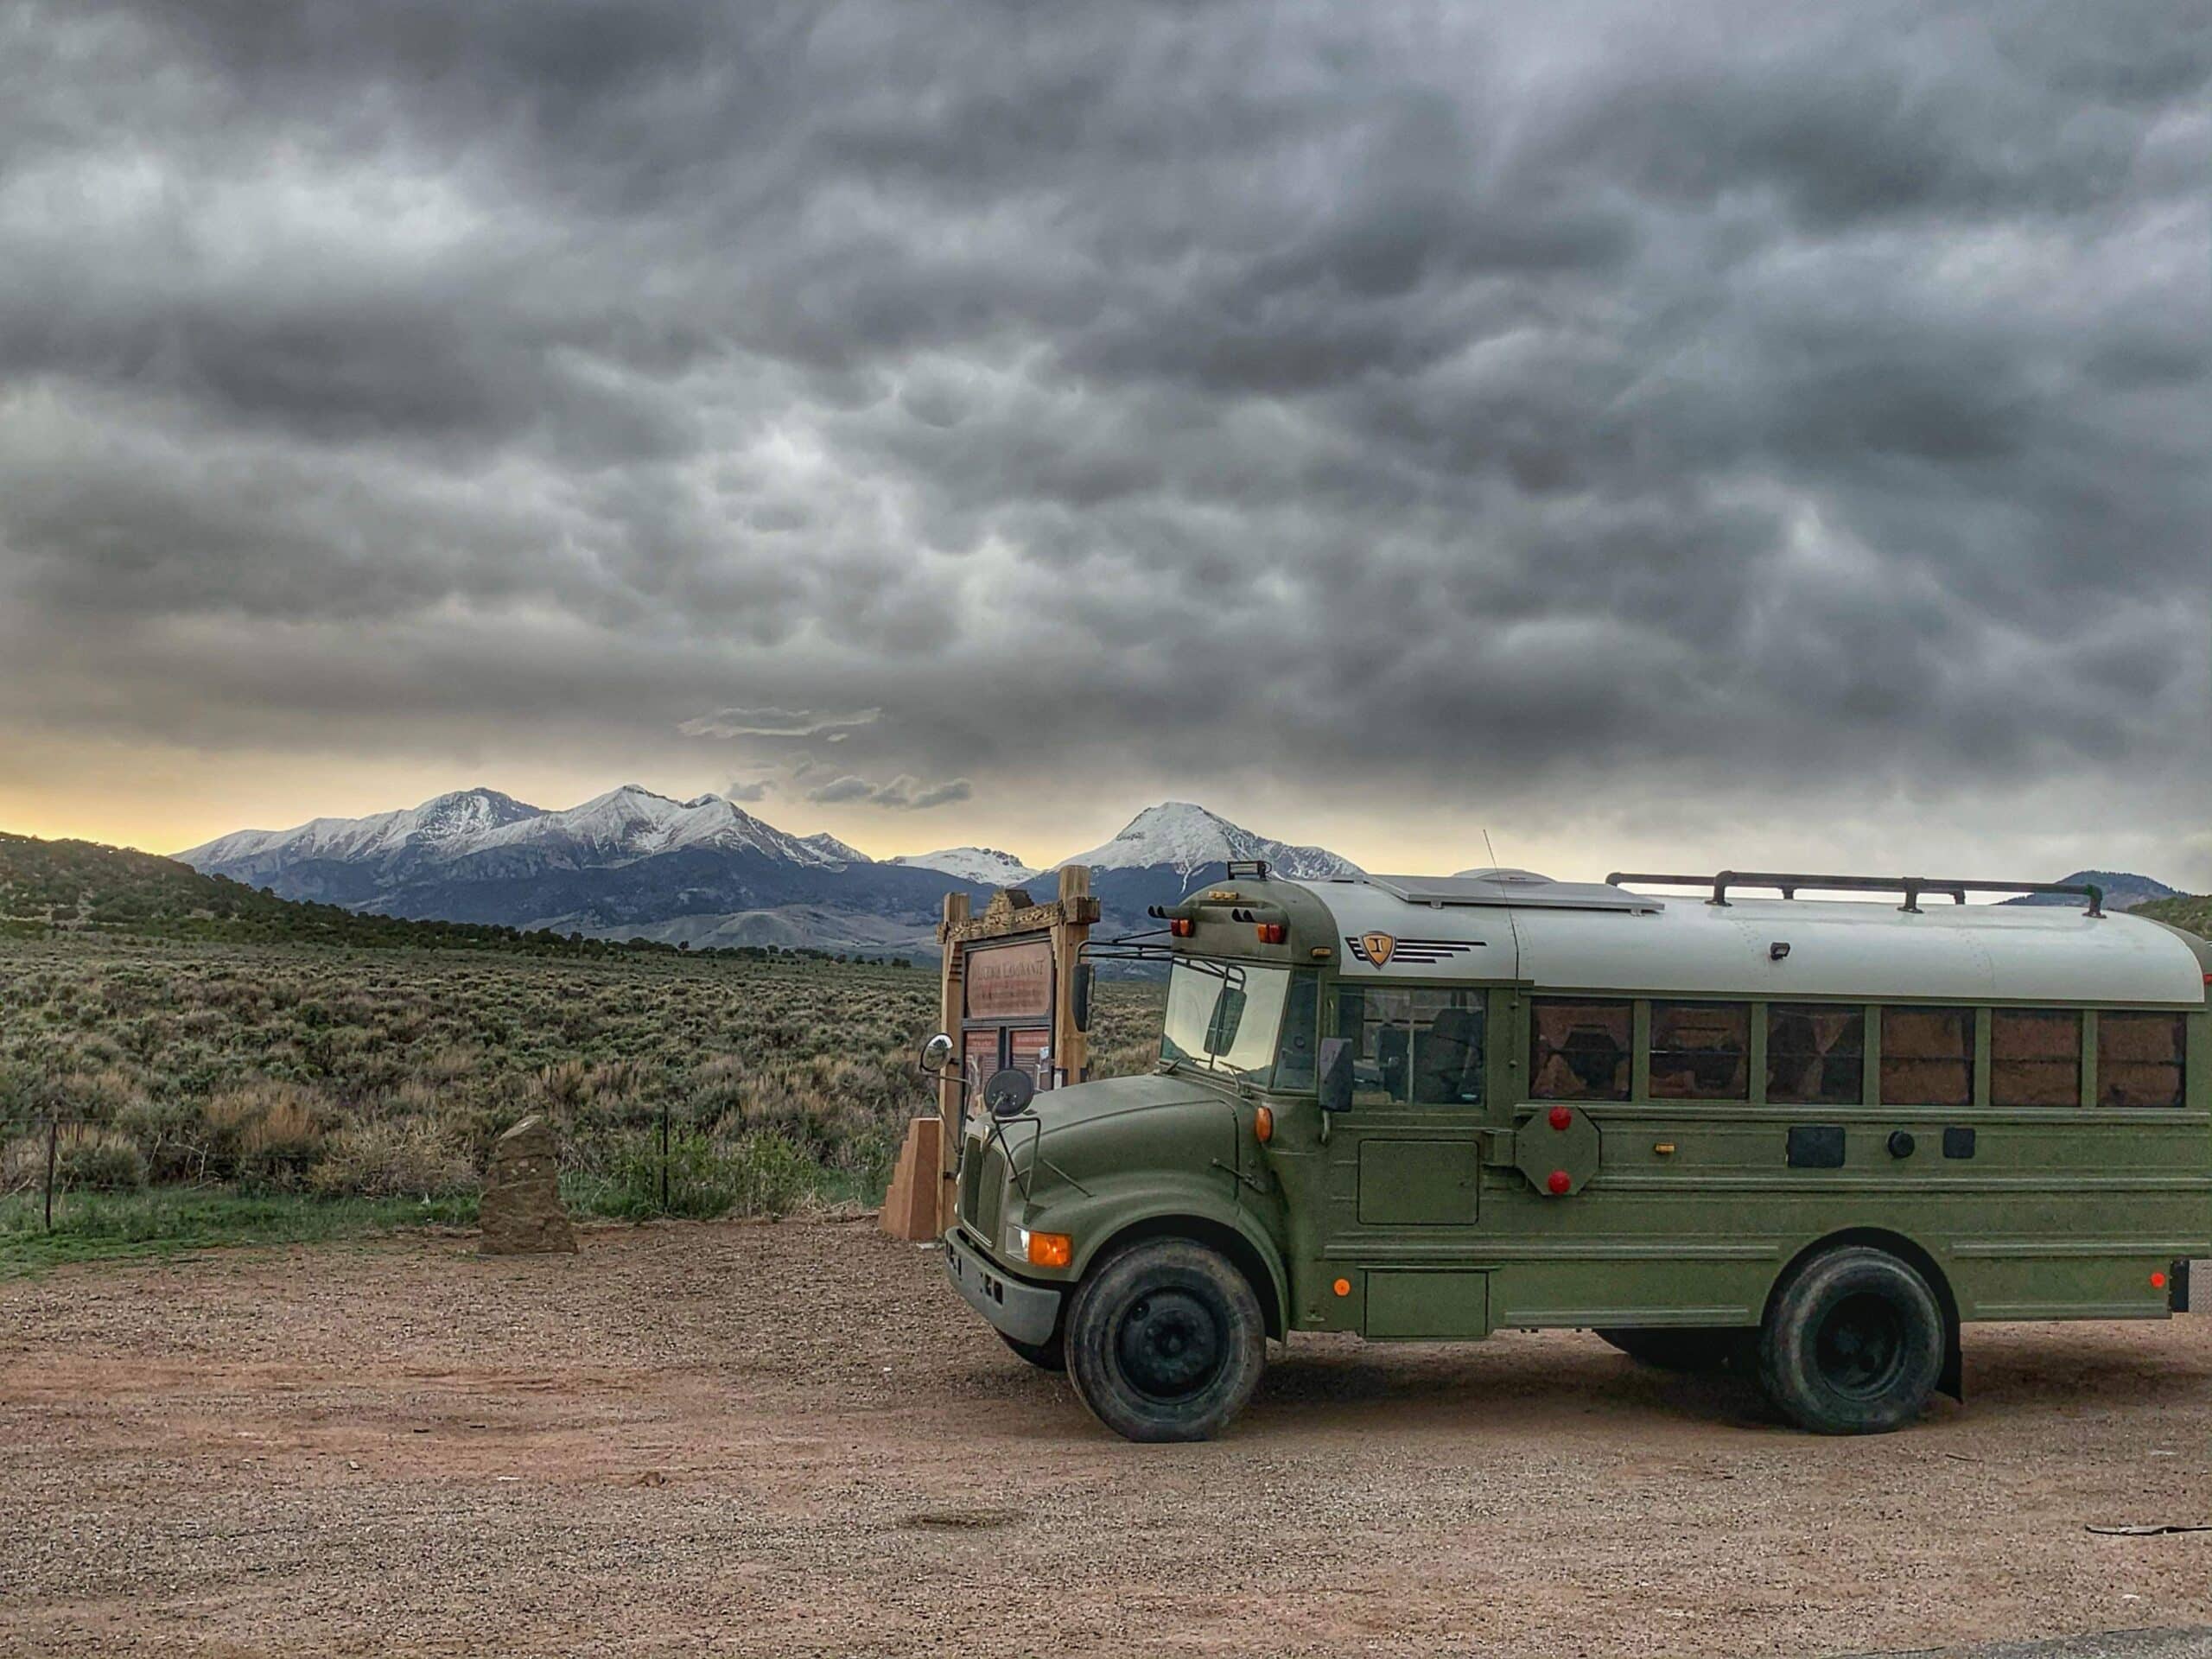 A green skoolie is boondocking next to the "Welcome Camininante" sign